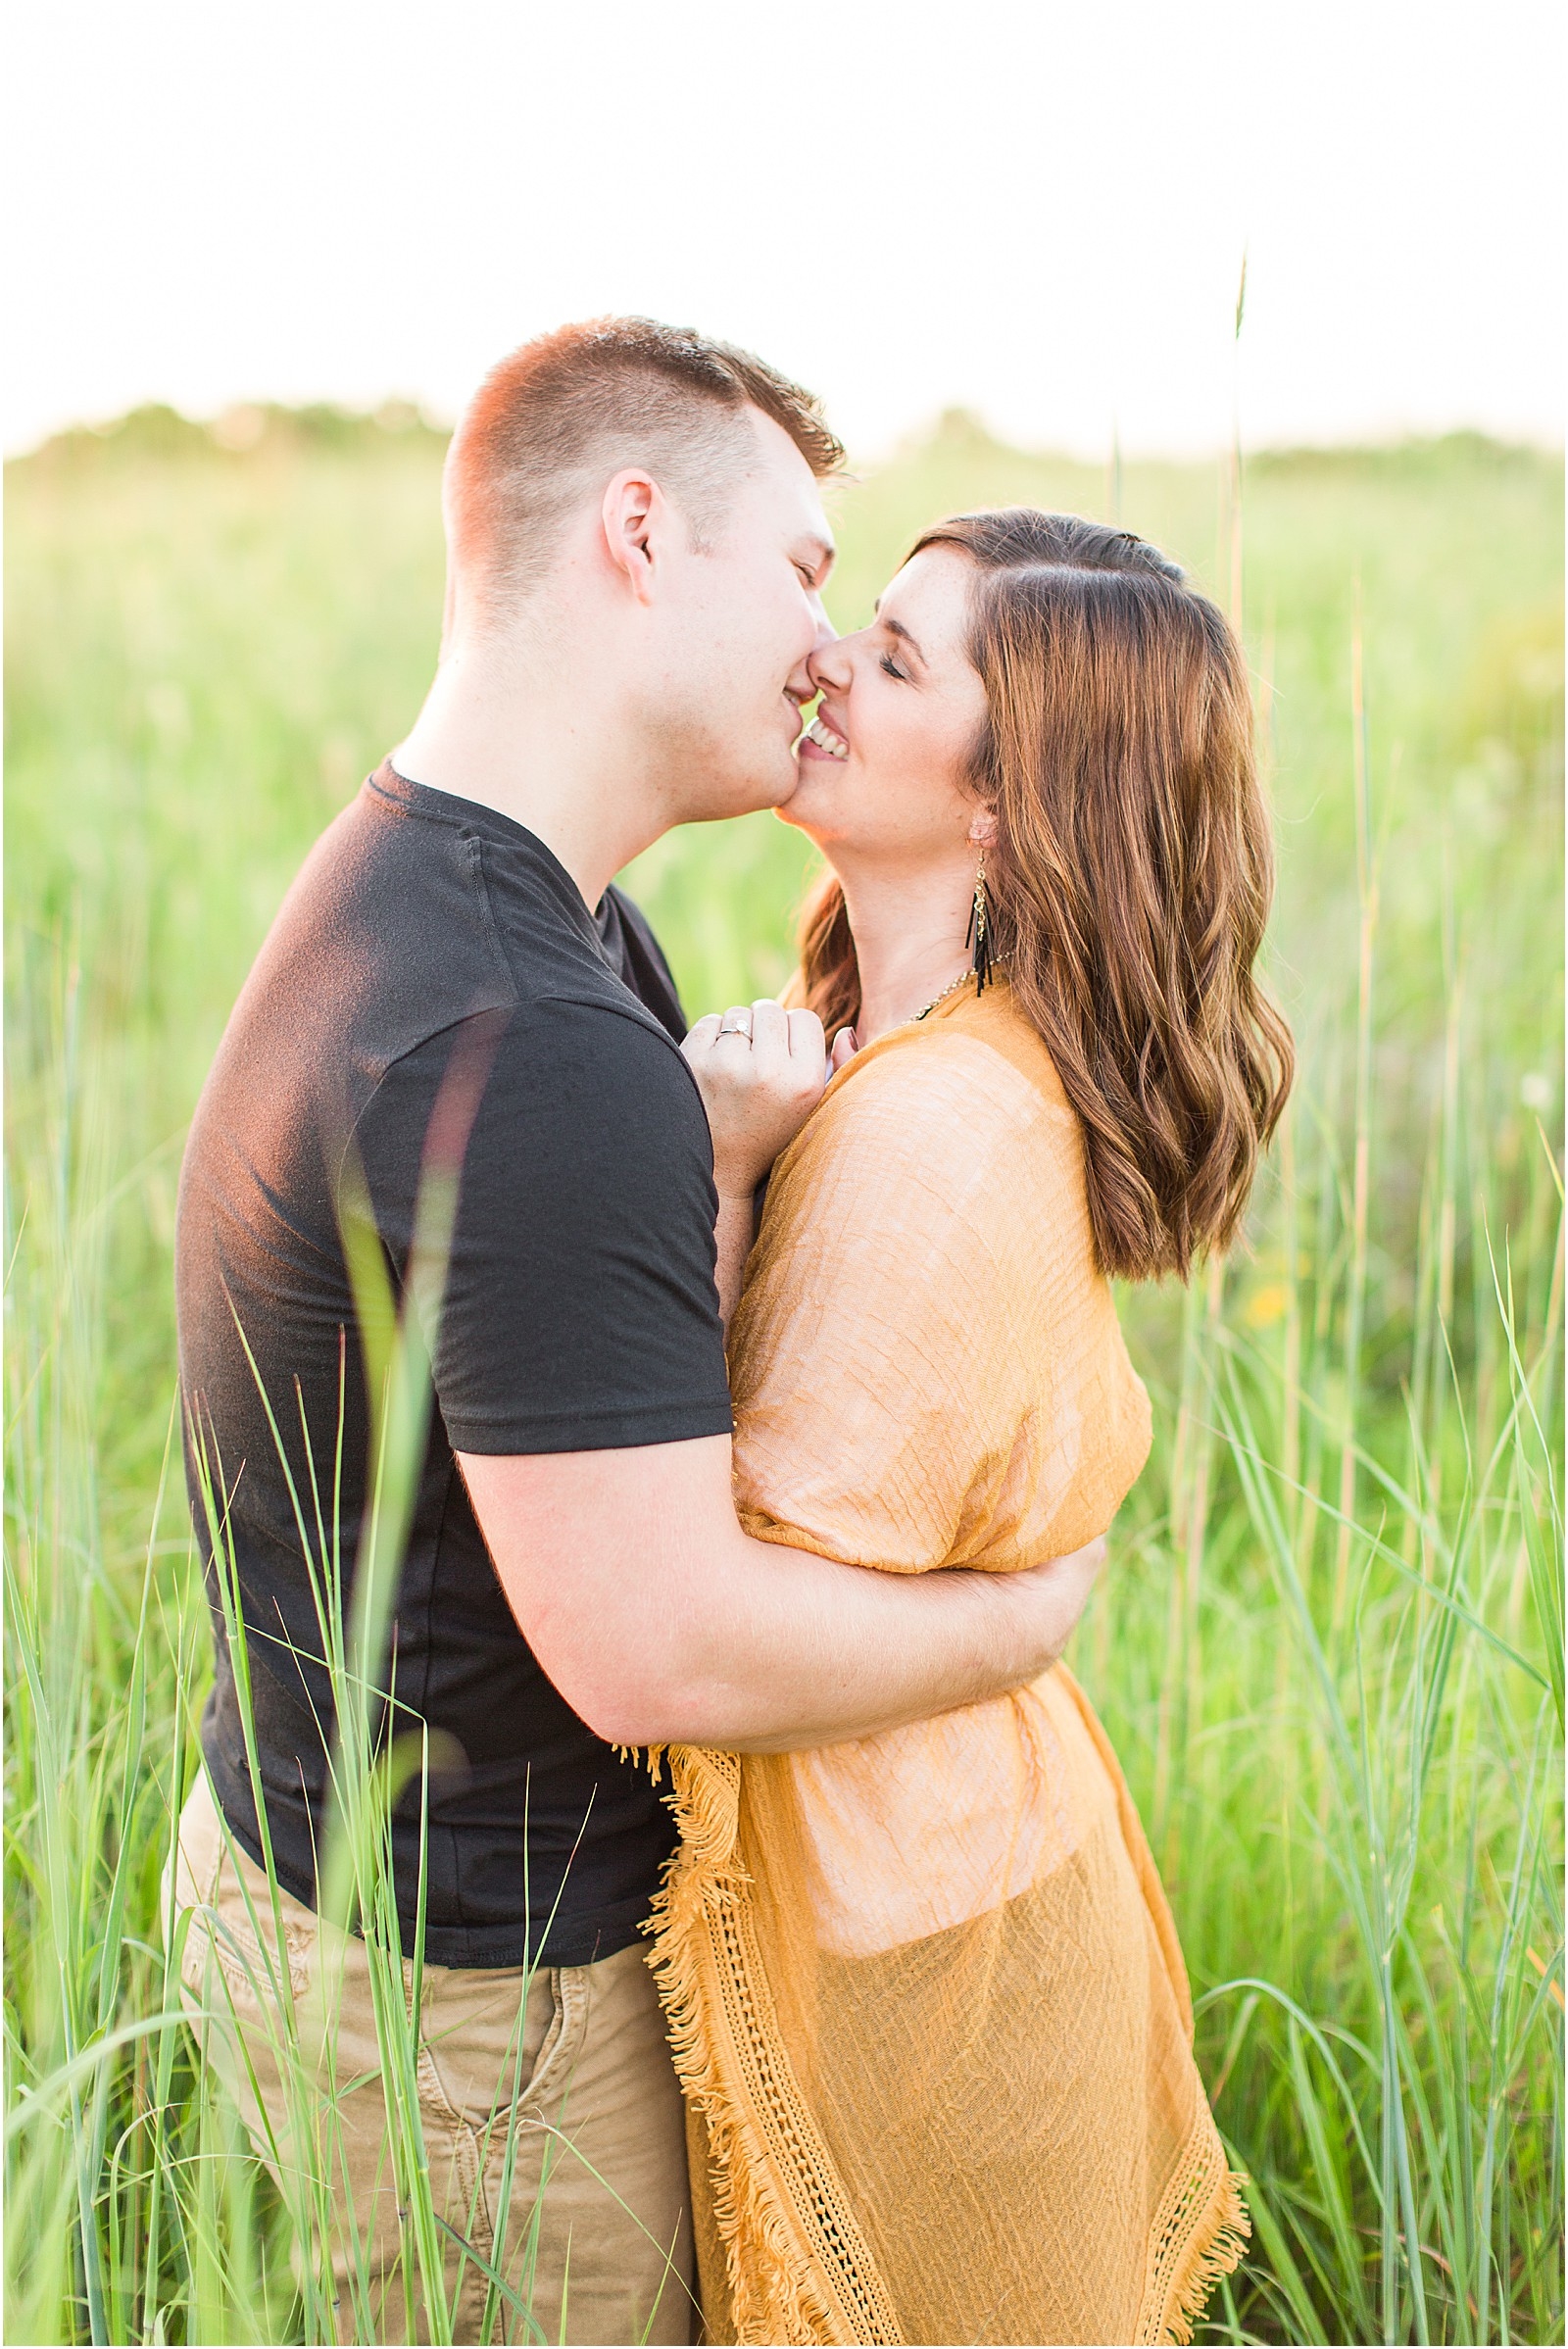 Downtown Huntingburgh Engagement Session | Gabby and Aidan | Bret and Brtandie Photography 026.jpg